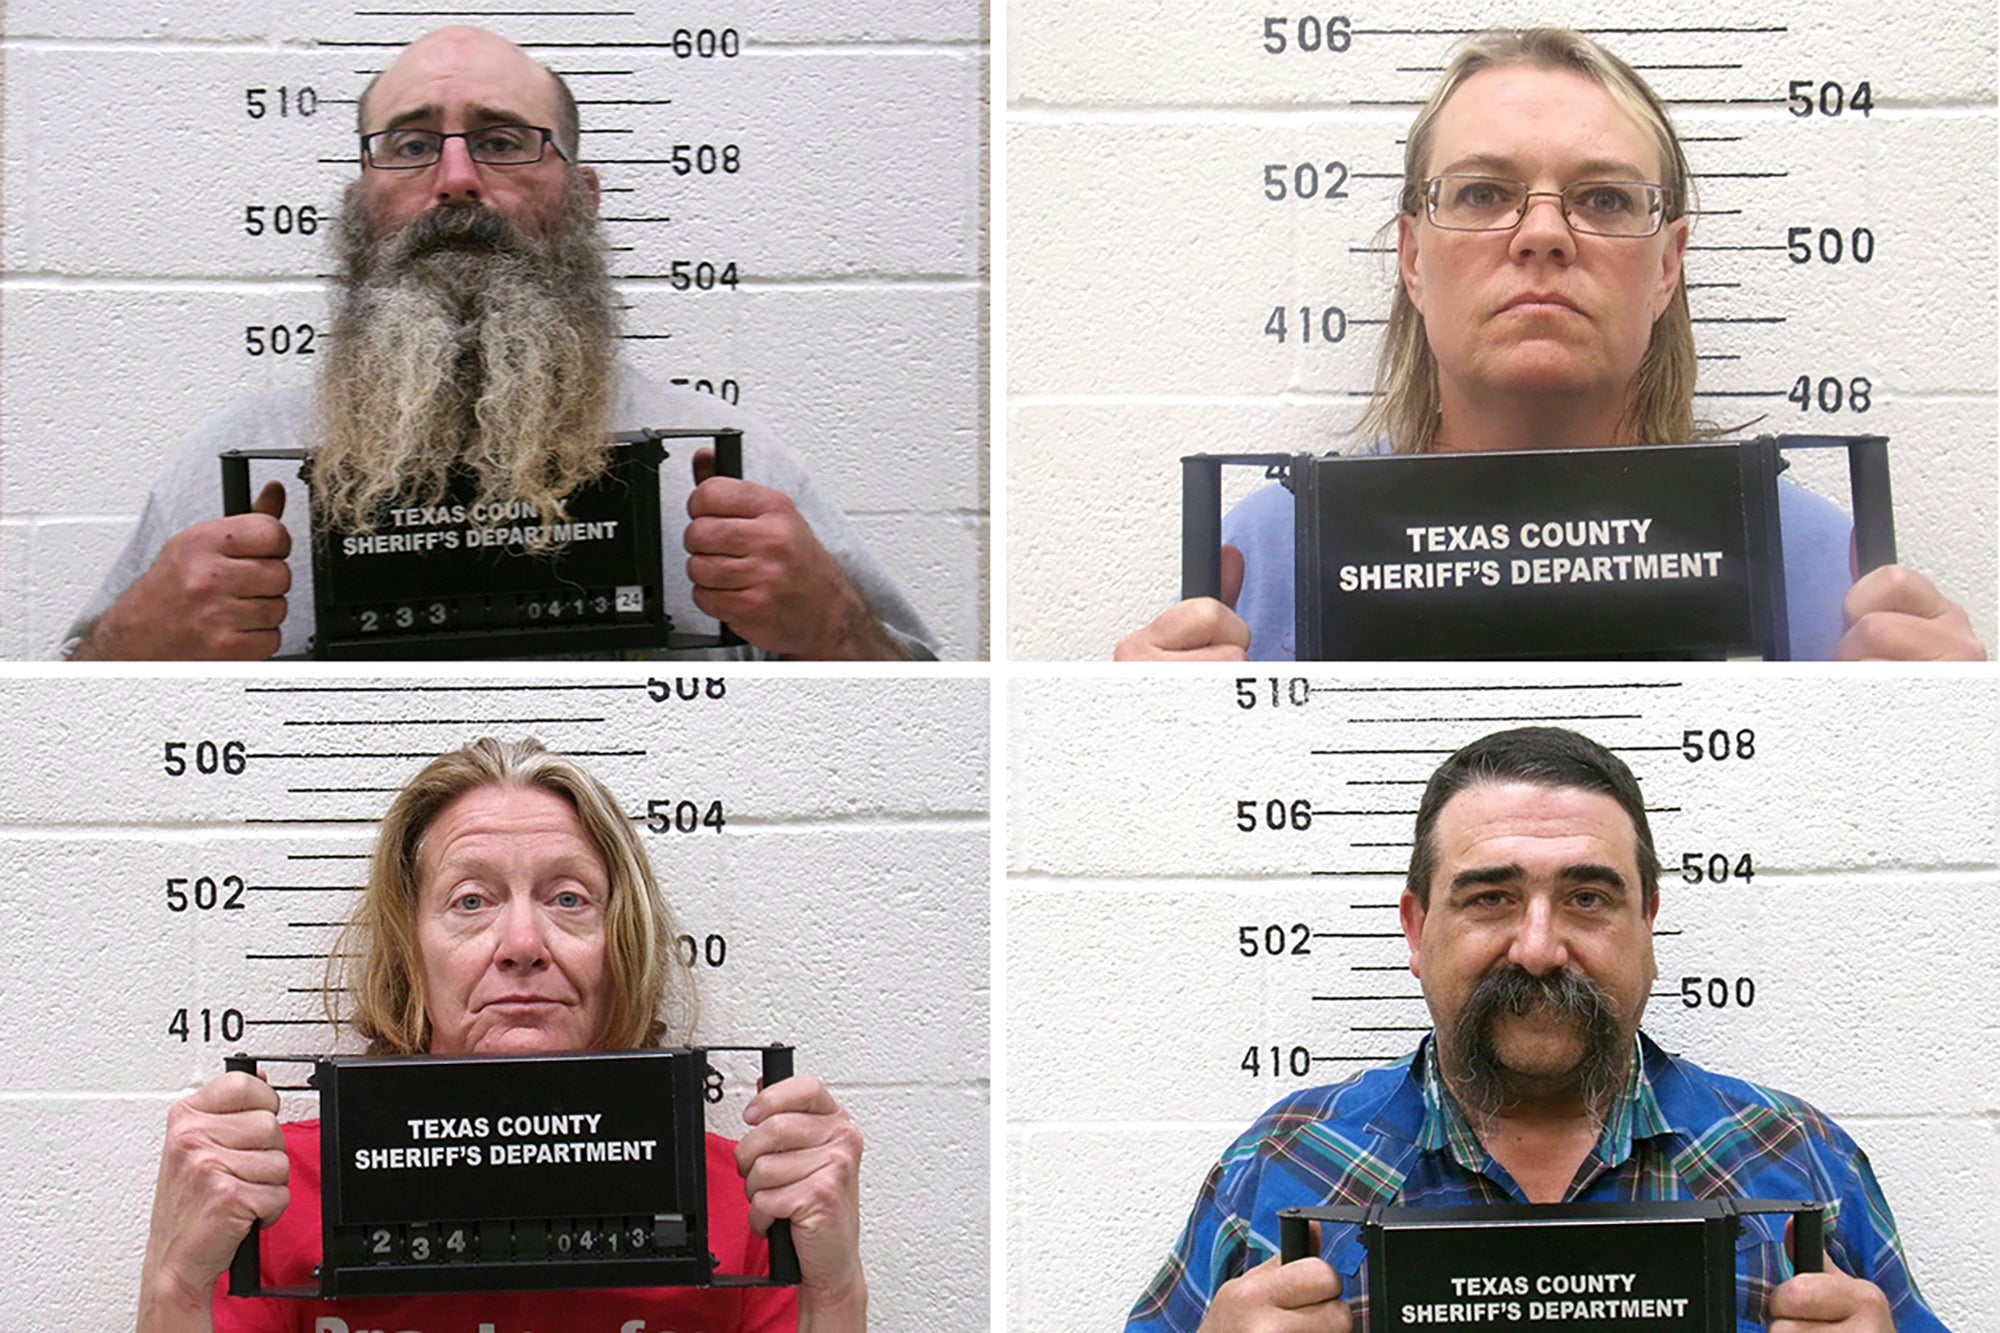 Tad Bert Cullum, top left, Cora Twombly, top right, Tifany Machel Adams, bottom left, and Cole Earl Twombly, bottom right, were arrested and charged with the murder and kidnapping of Veronica Butler and Jilian Kelley